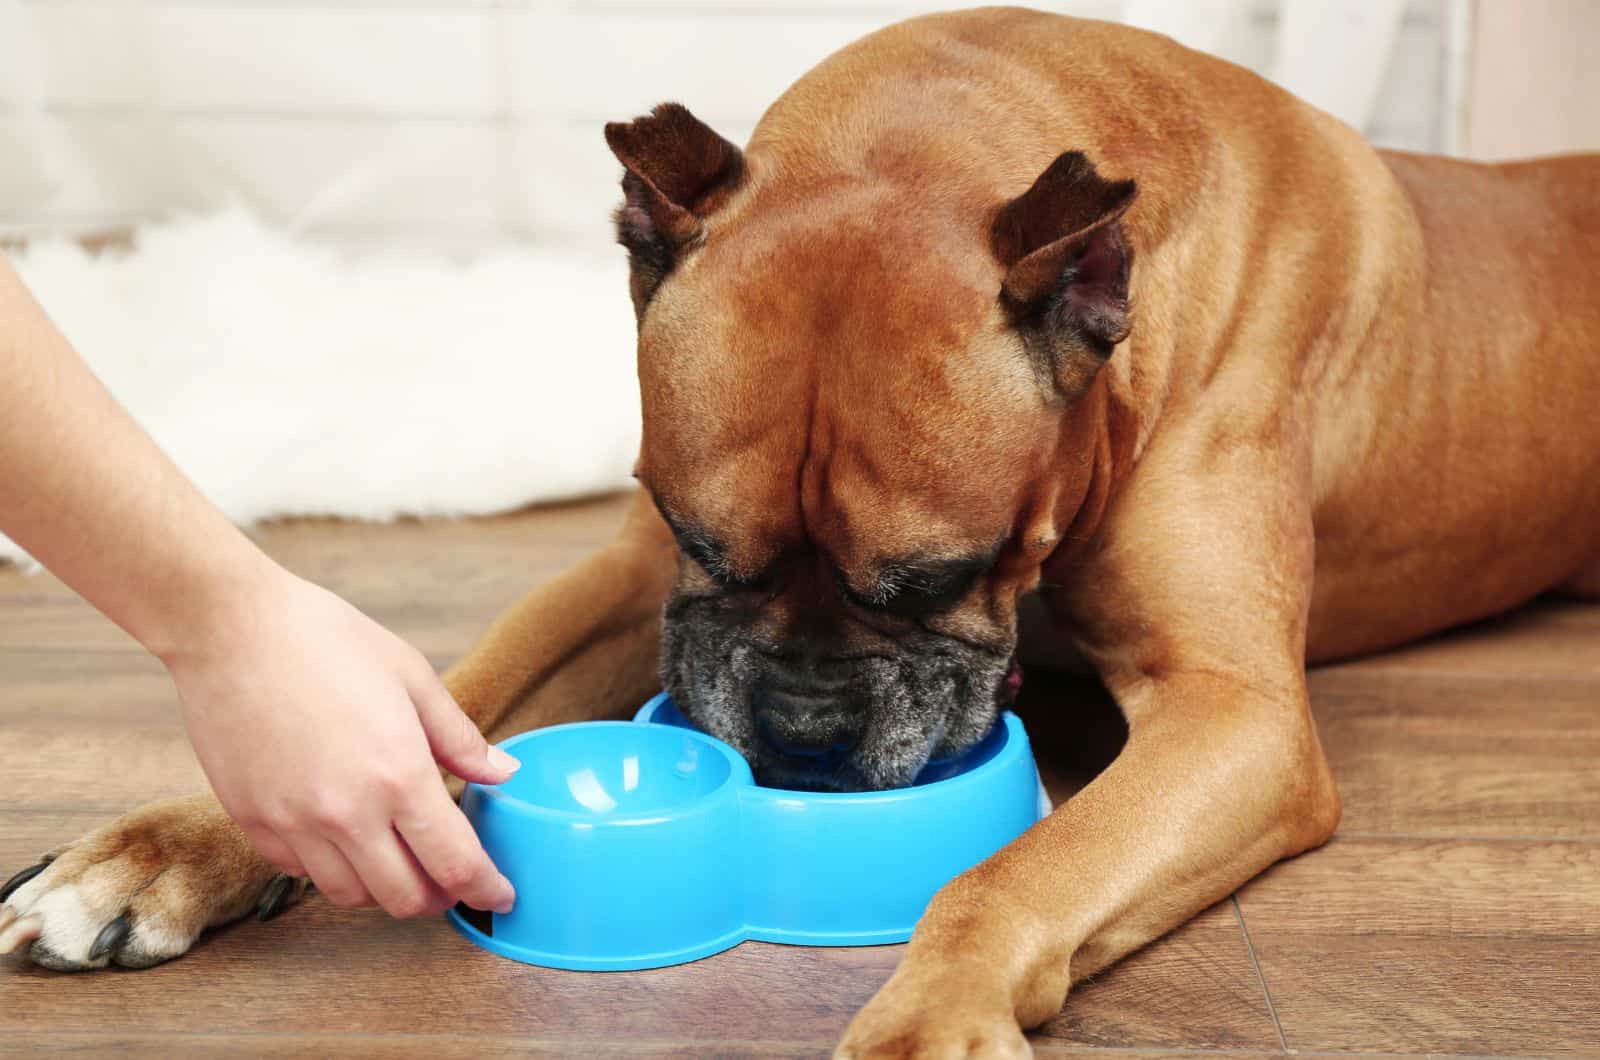 Boxer eating out of blue bowl